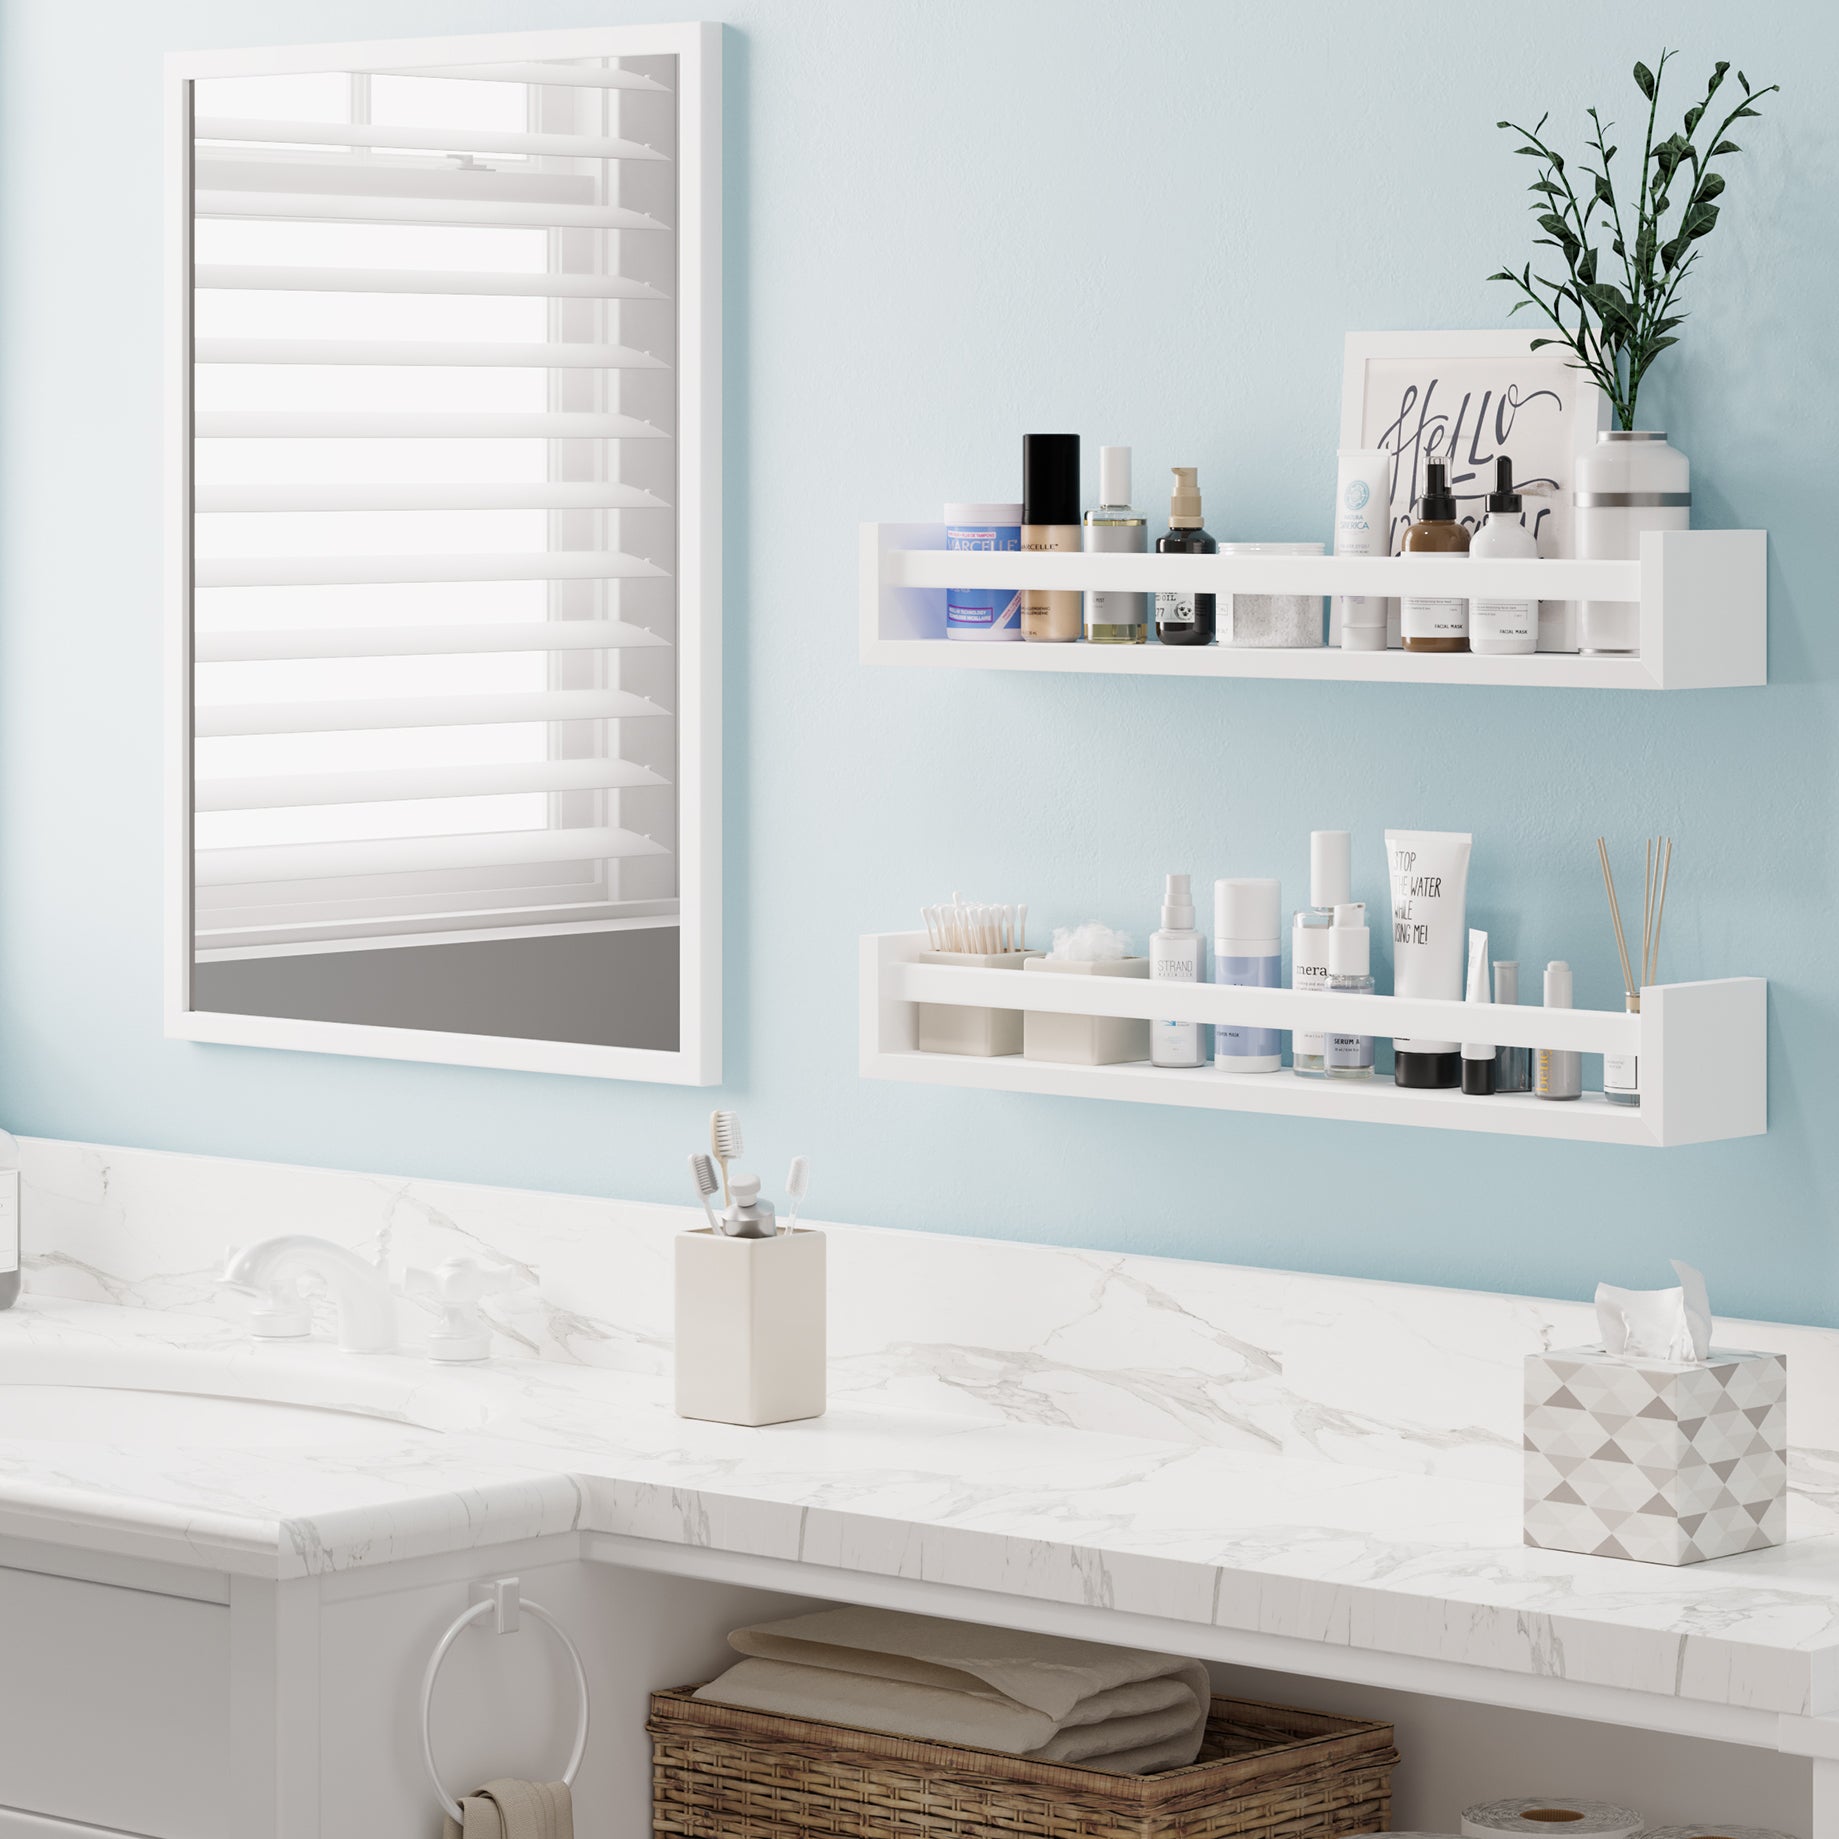 Two white organizer shelves for bathroom with natural wood rods in a bathroom setting, holding skincare products and decor items. Mounted on a light blue wall above a marble countertop, creating an organized and elegant space.